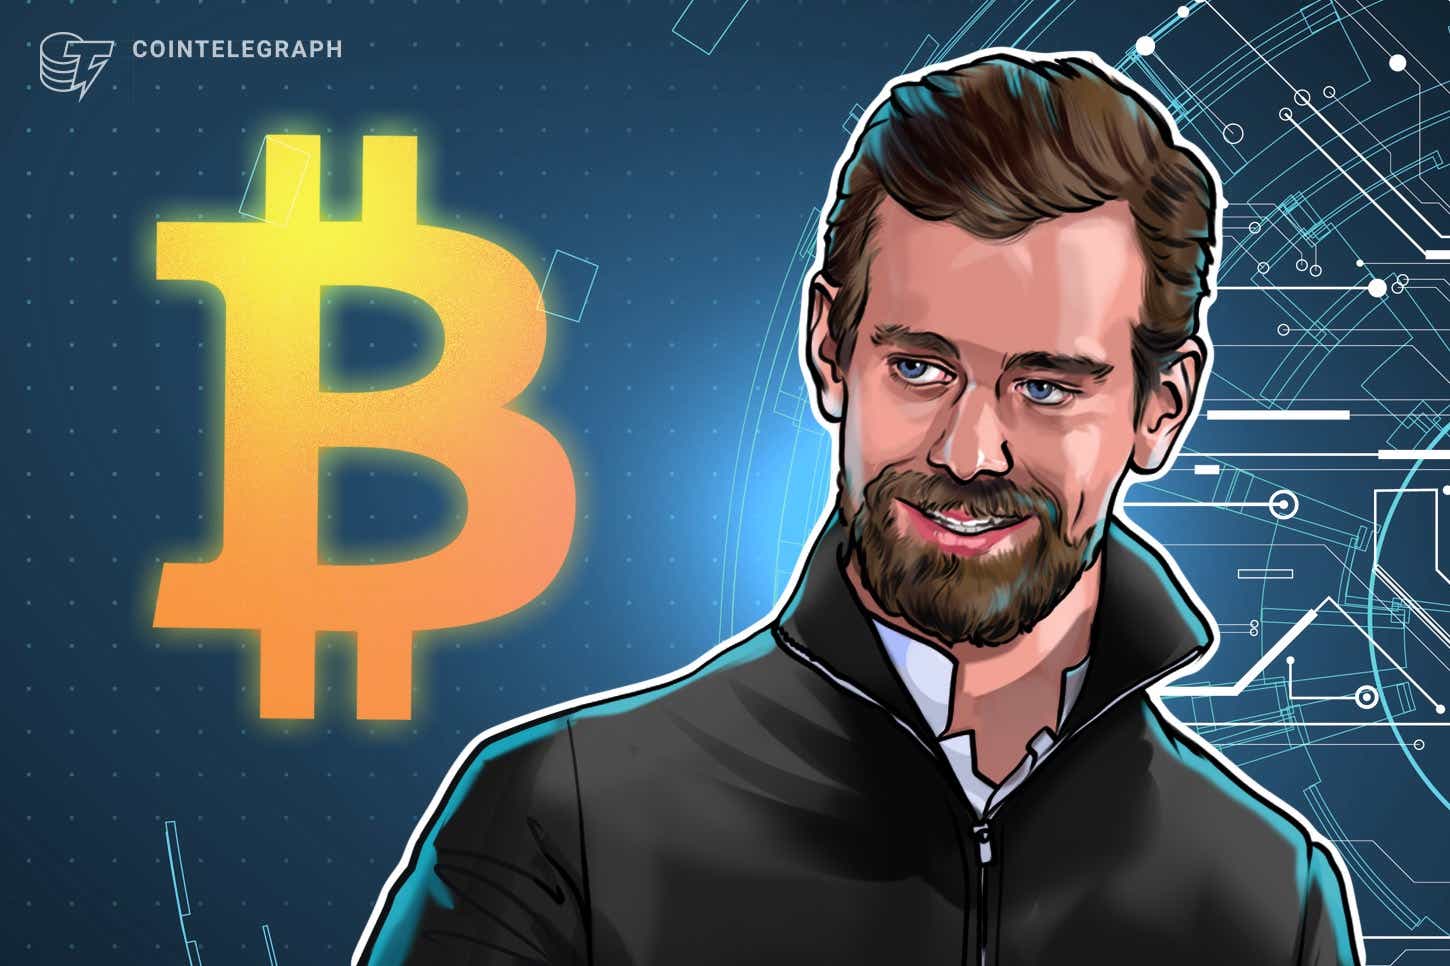 White-paper-introducing-jack-dorsey’s-decentralized-bitcoin-exchange-published-on-friday